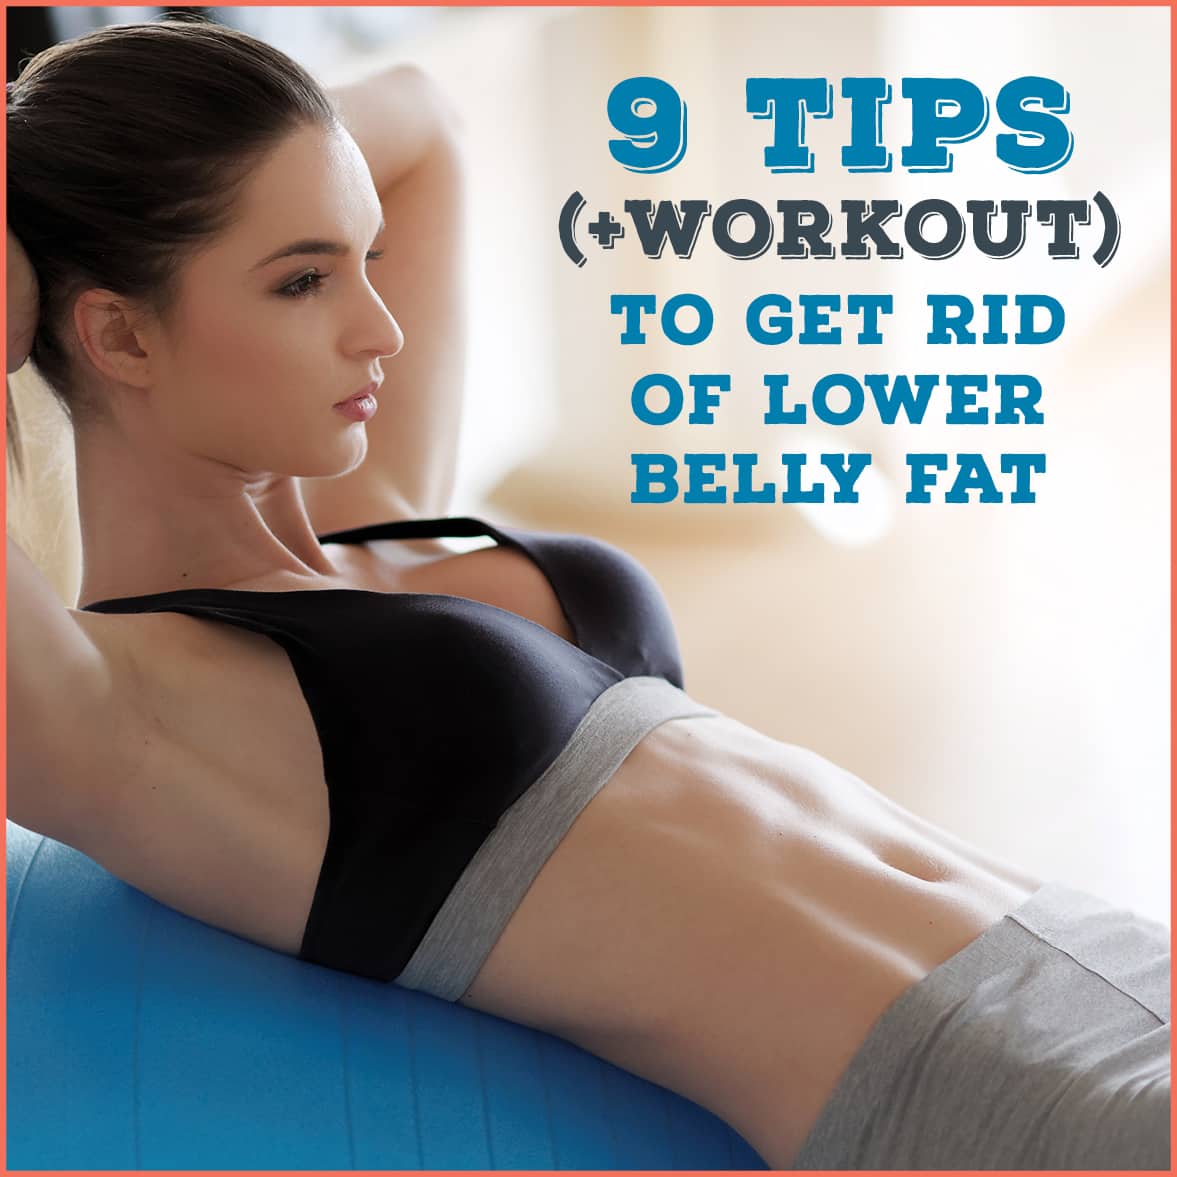 9 Tips + Workout to Get Rid of Lower Belly Fat